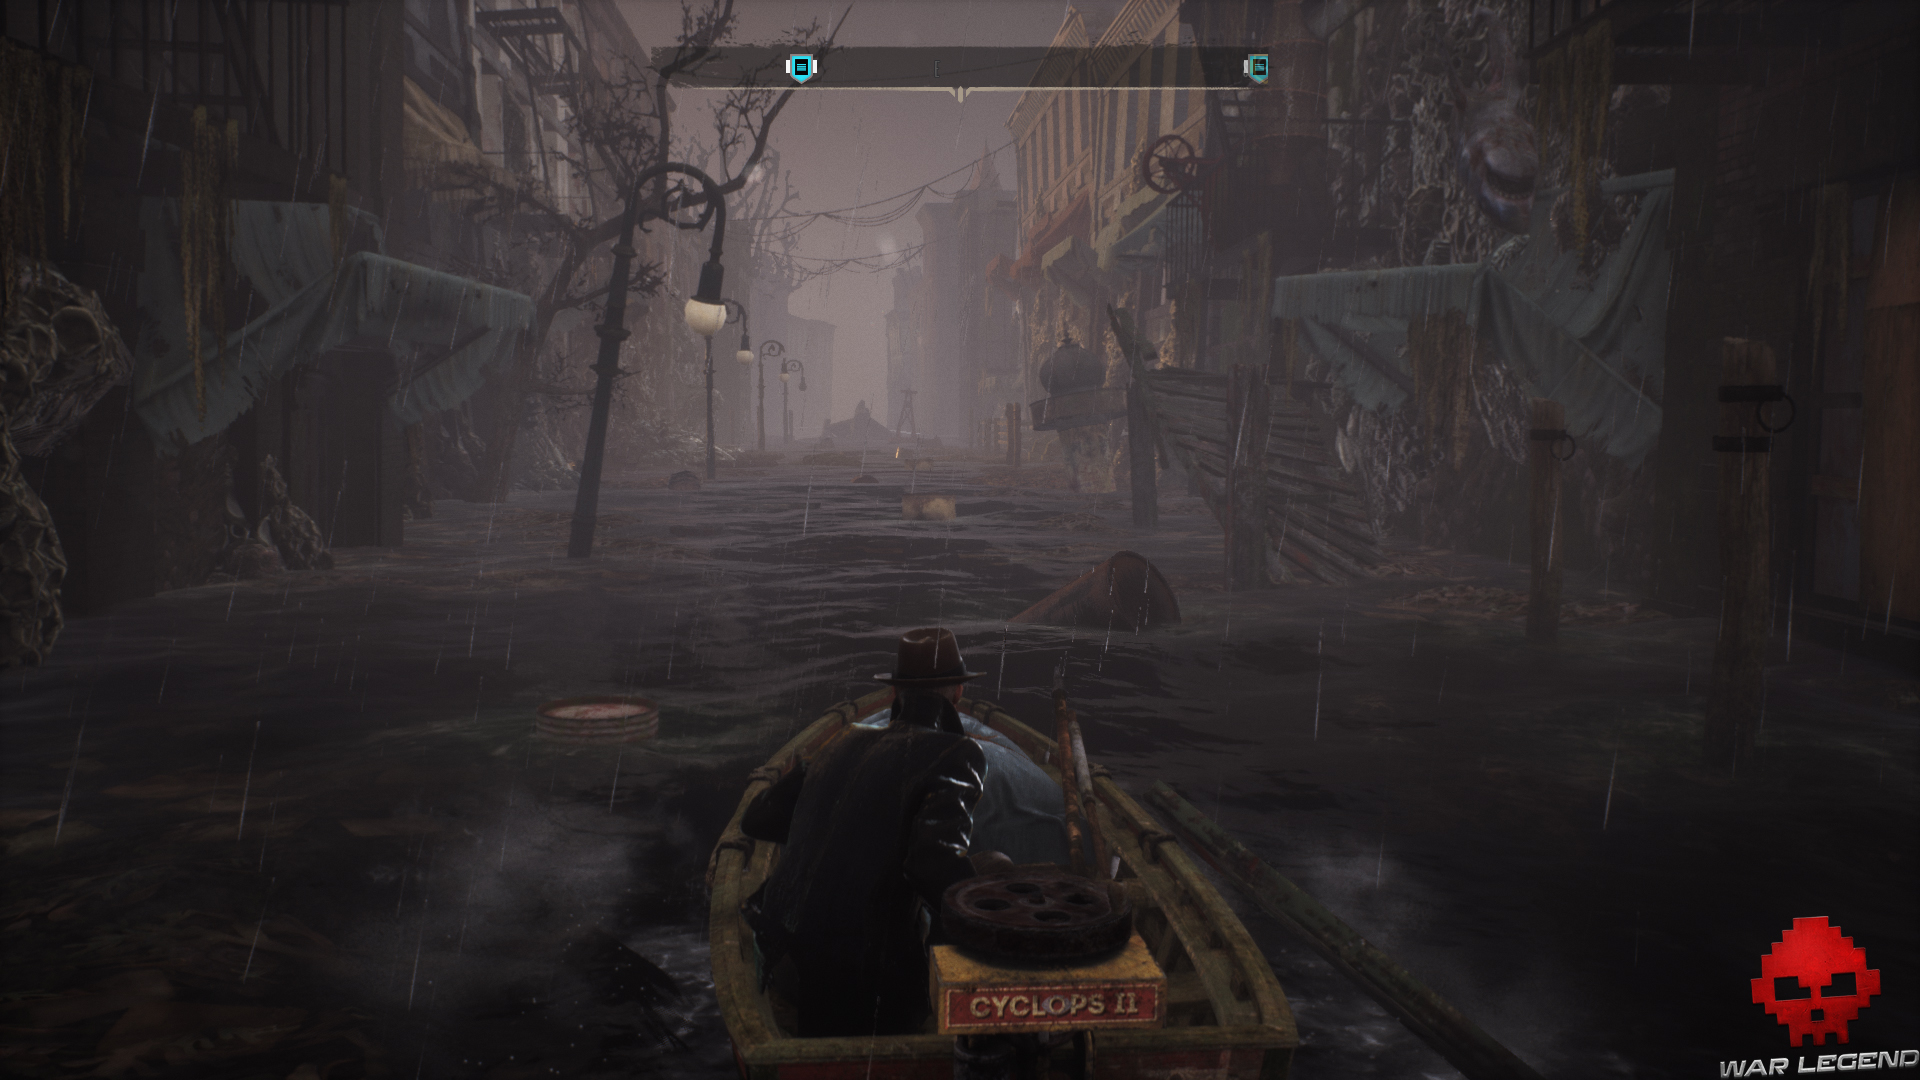 The sinking city image